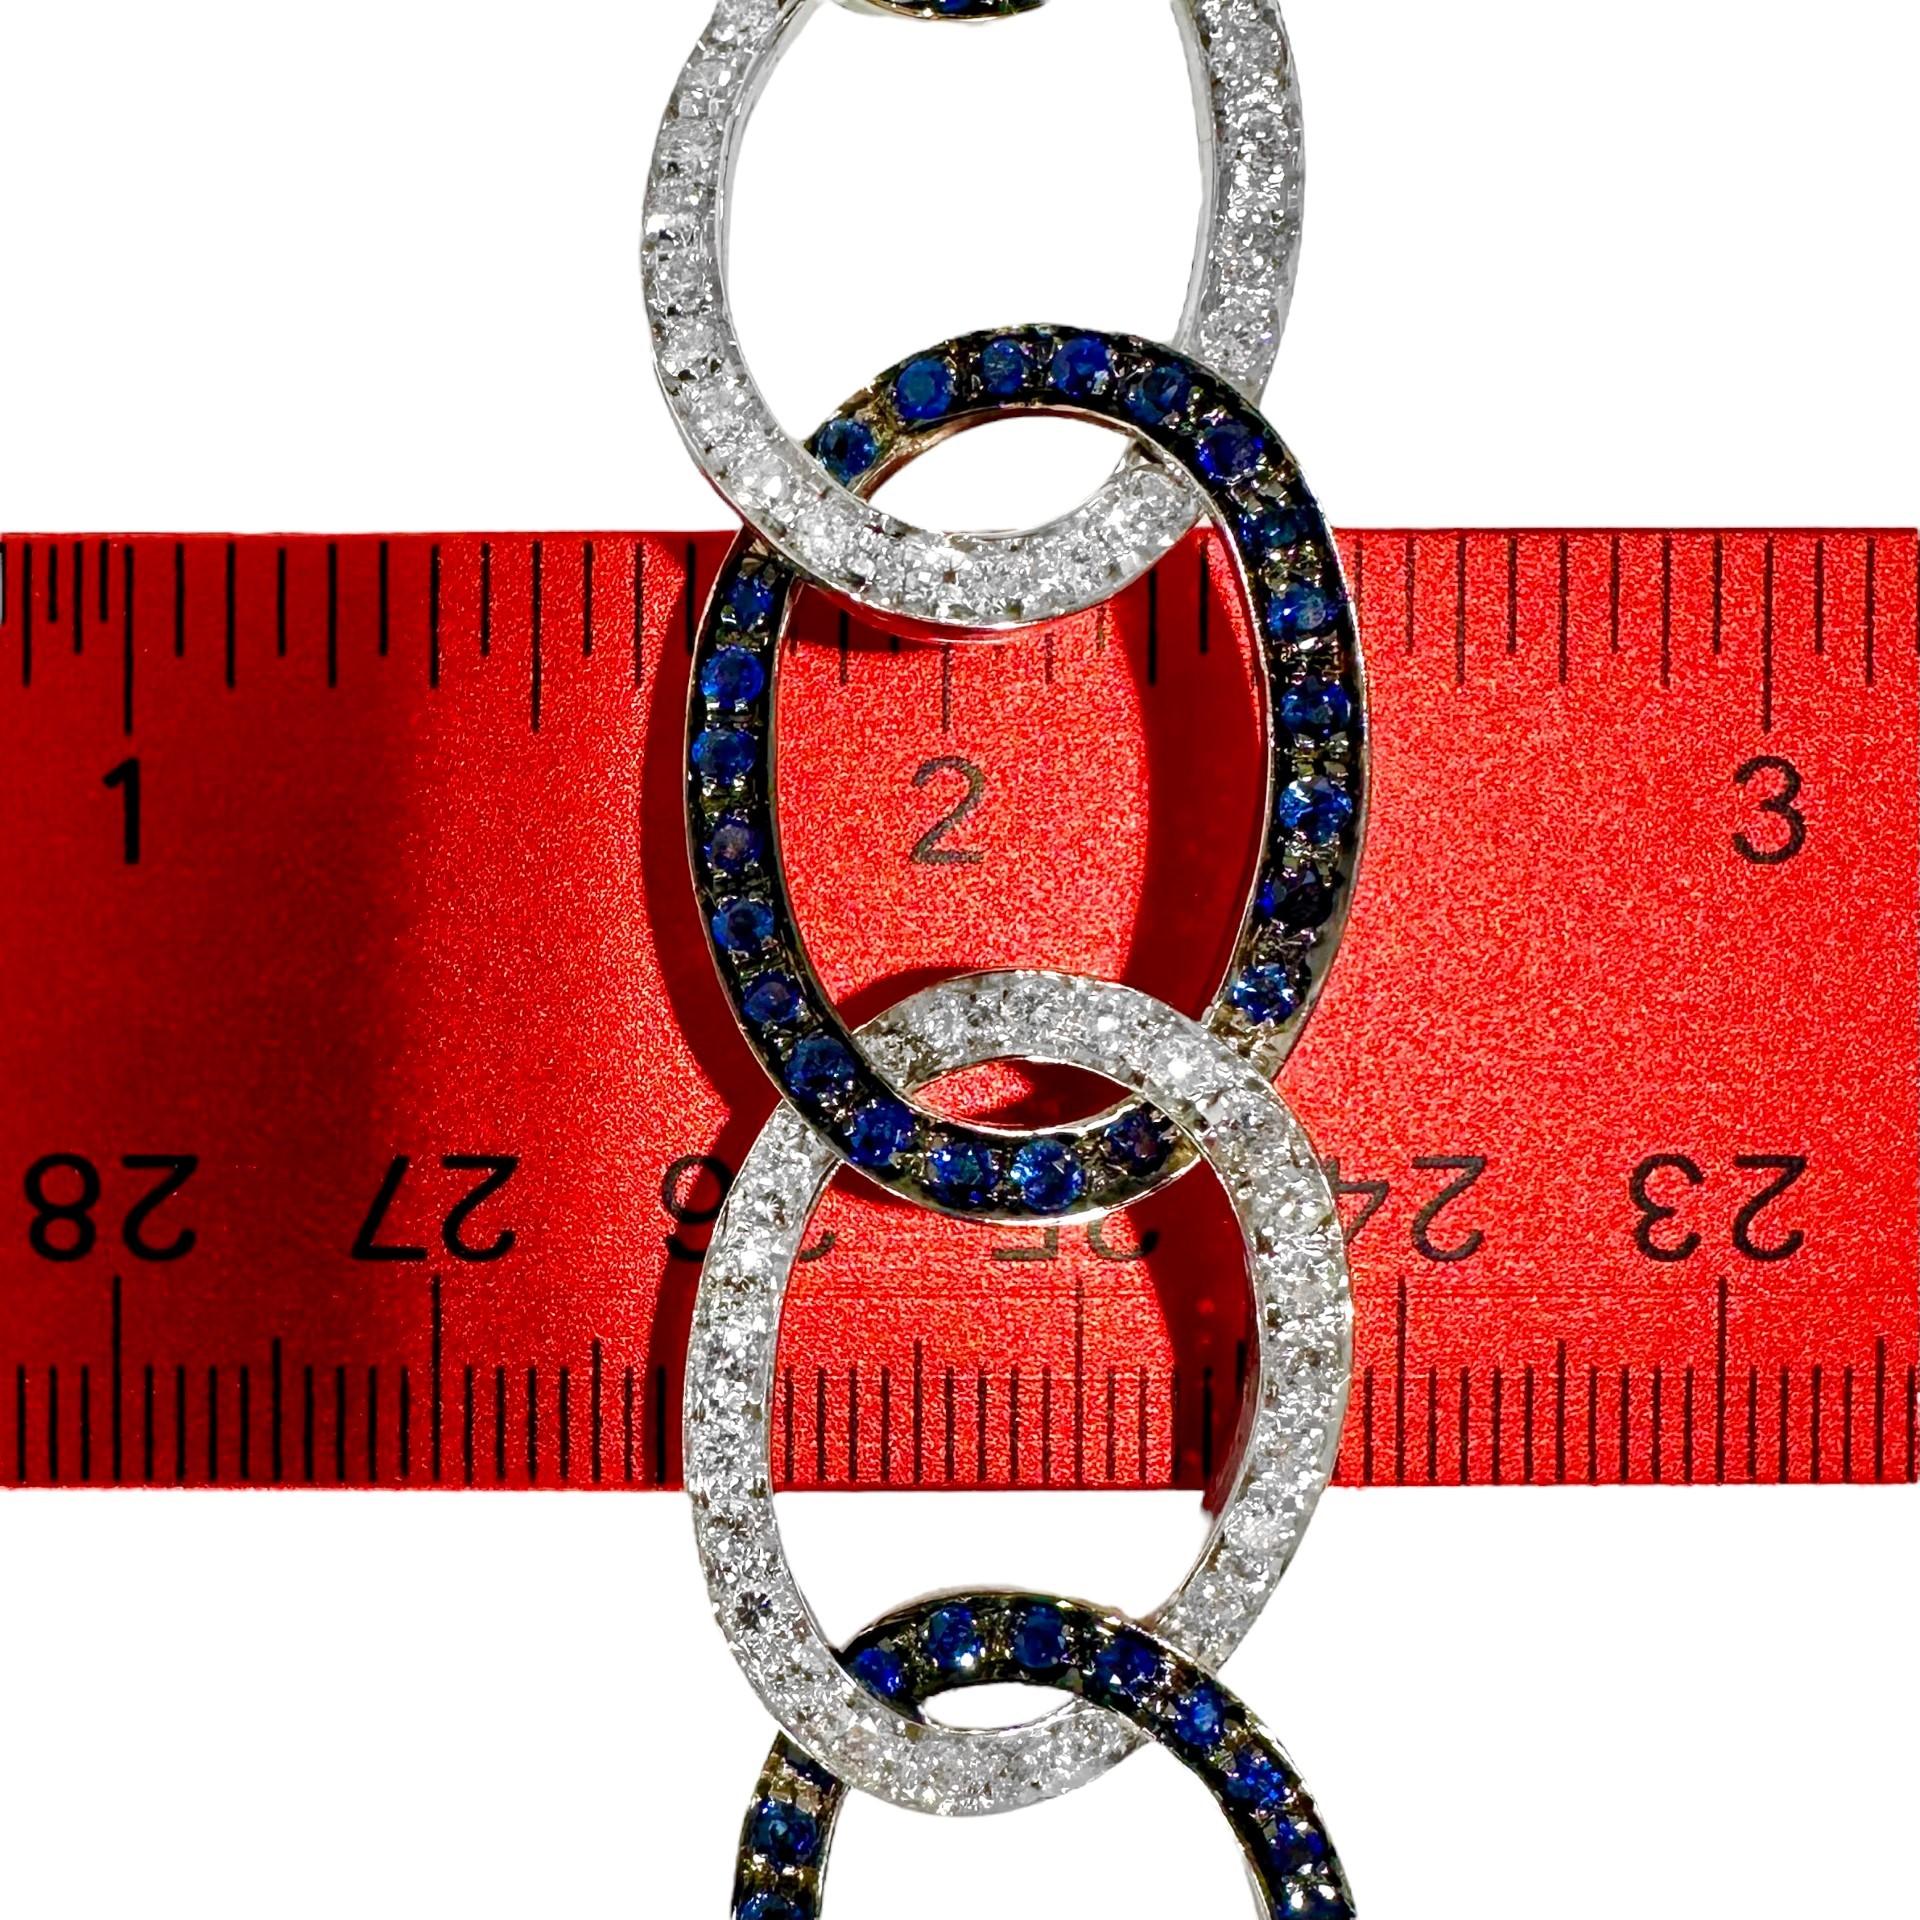 Vintage 18k White Gold Large Open Link Diamond and Sapphire Choker Necklace For Sale 1